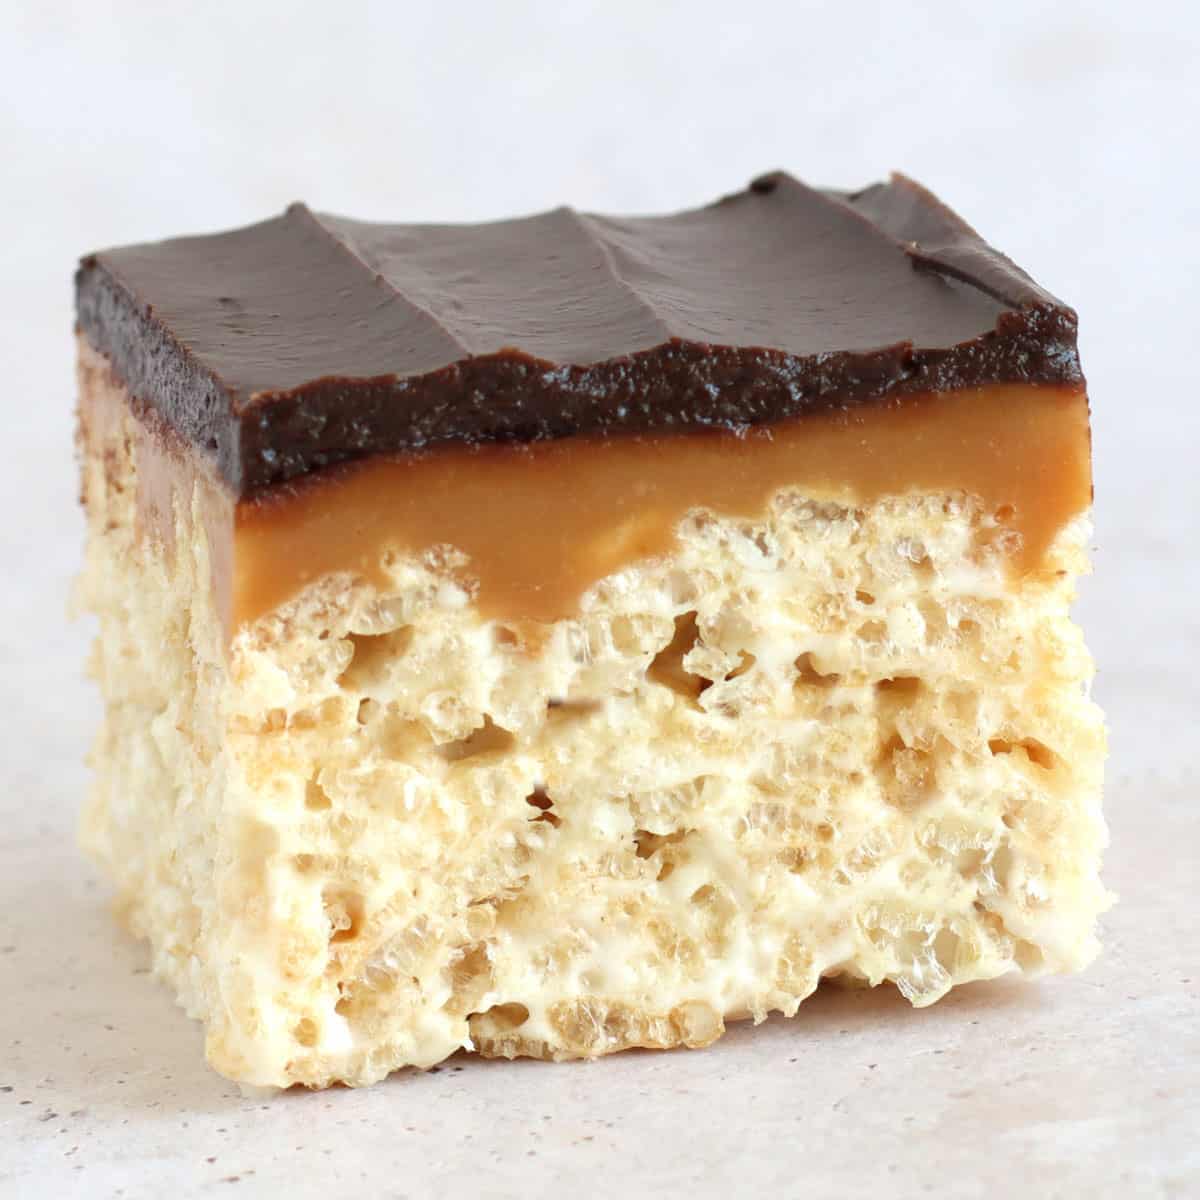 rice krispie treat bar topped with caramel and chocolate